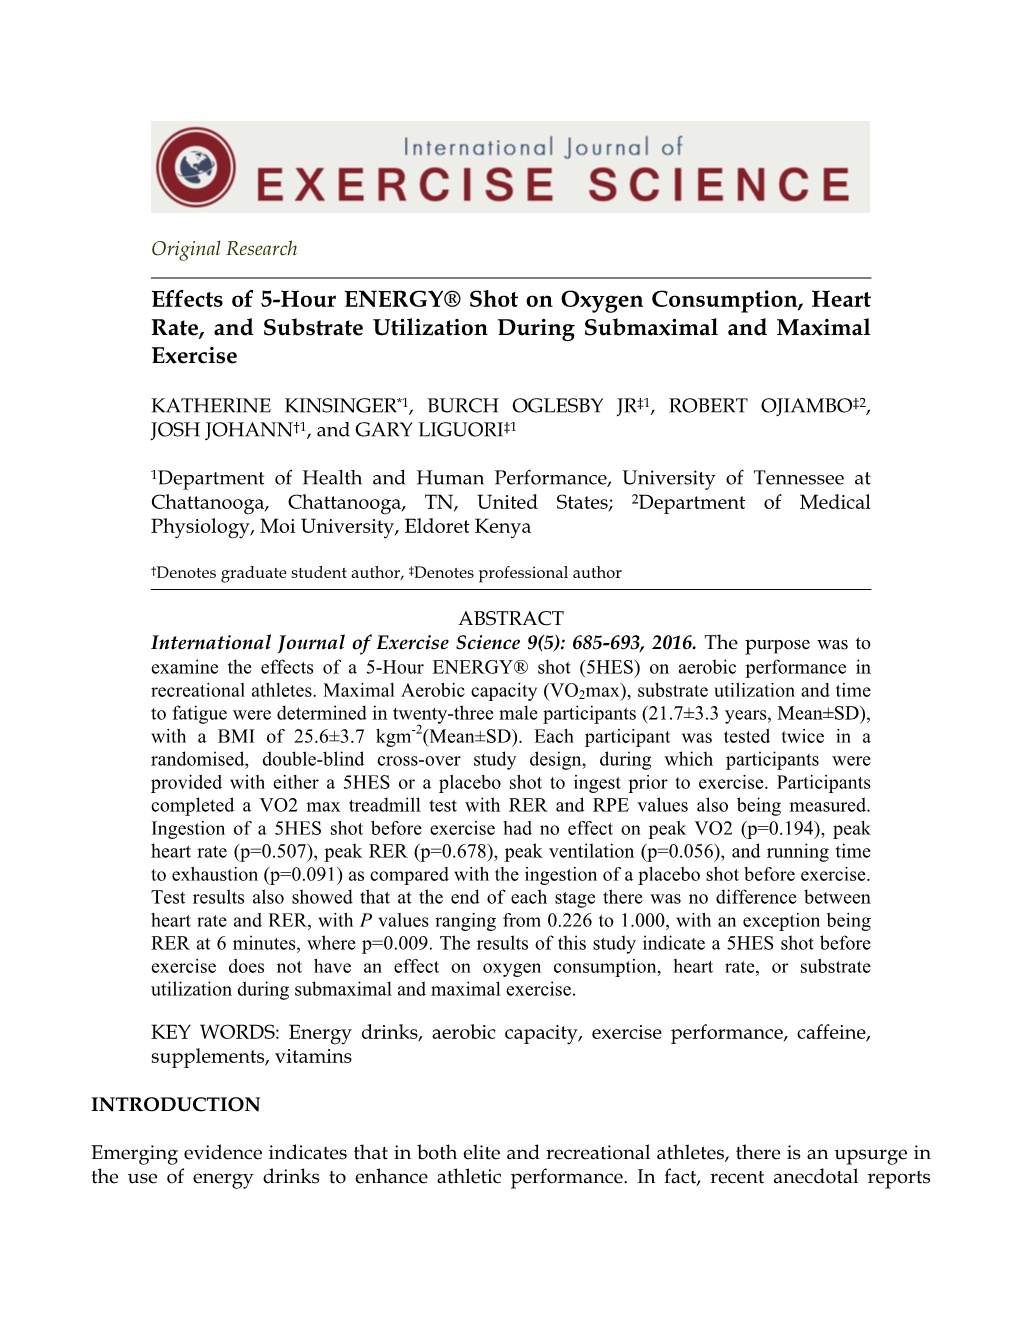 Effects of 5-Hour ENERGY® Shot on Oxygen Consumption, Heart Rate, and Substrate Utilization During Submaximal and Maximal Exercise